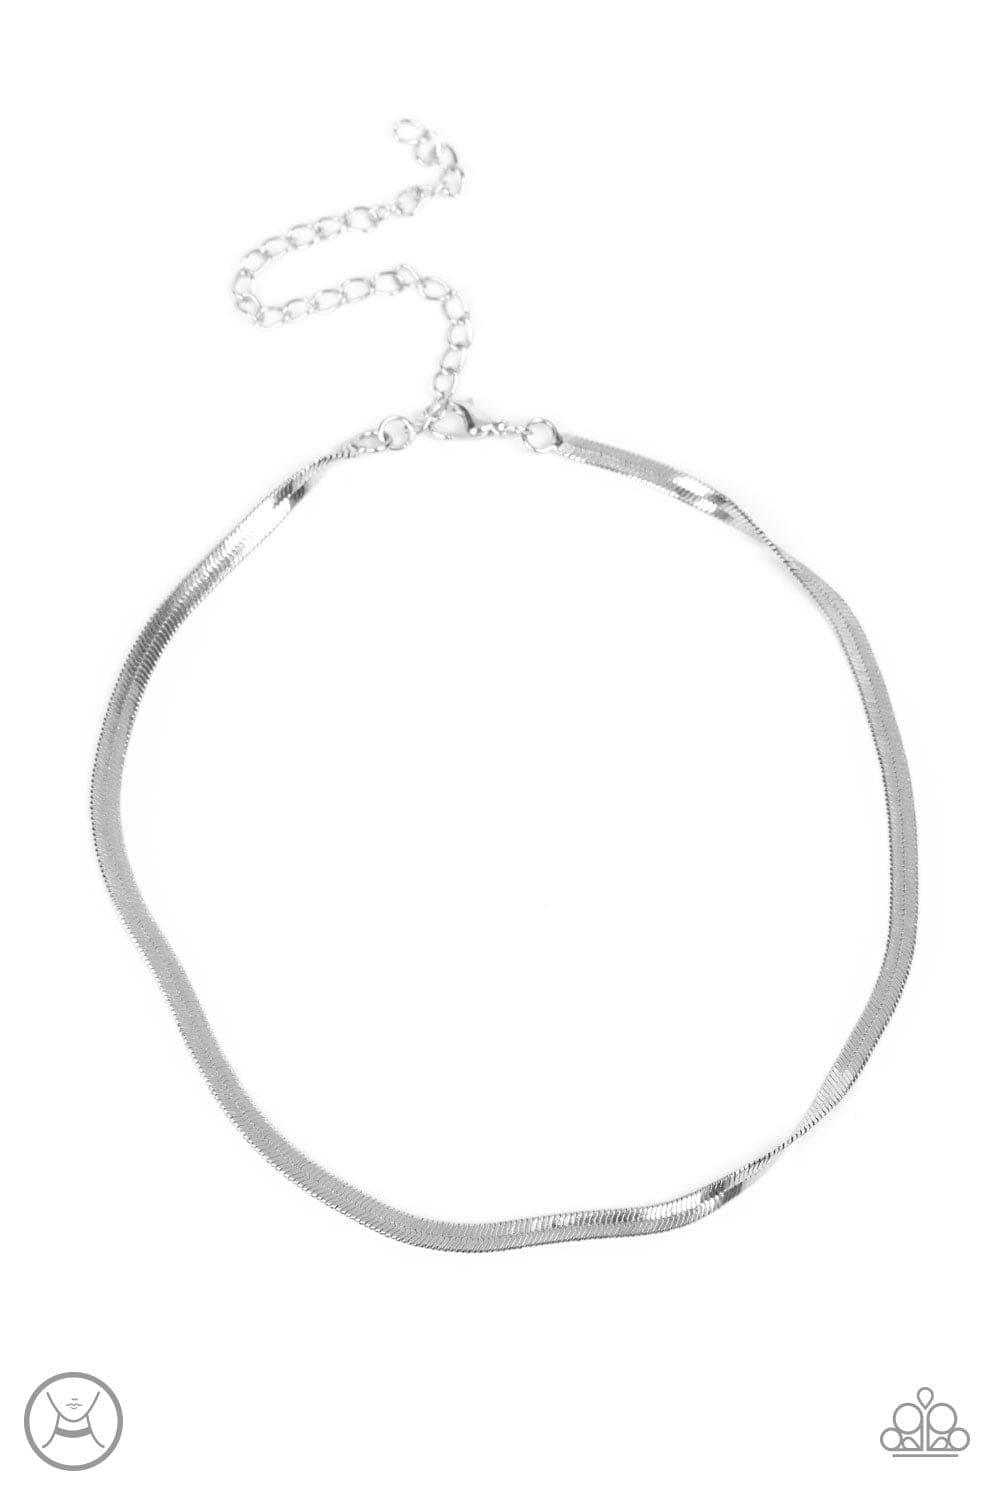 Paparazzi Accessories - In No Time Flat - Silver Choker Necklace - Bling by JessieK